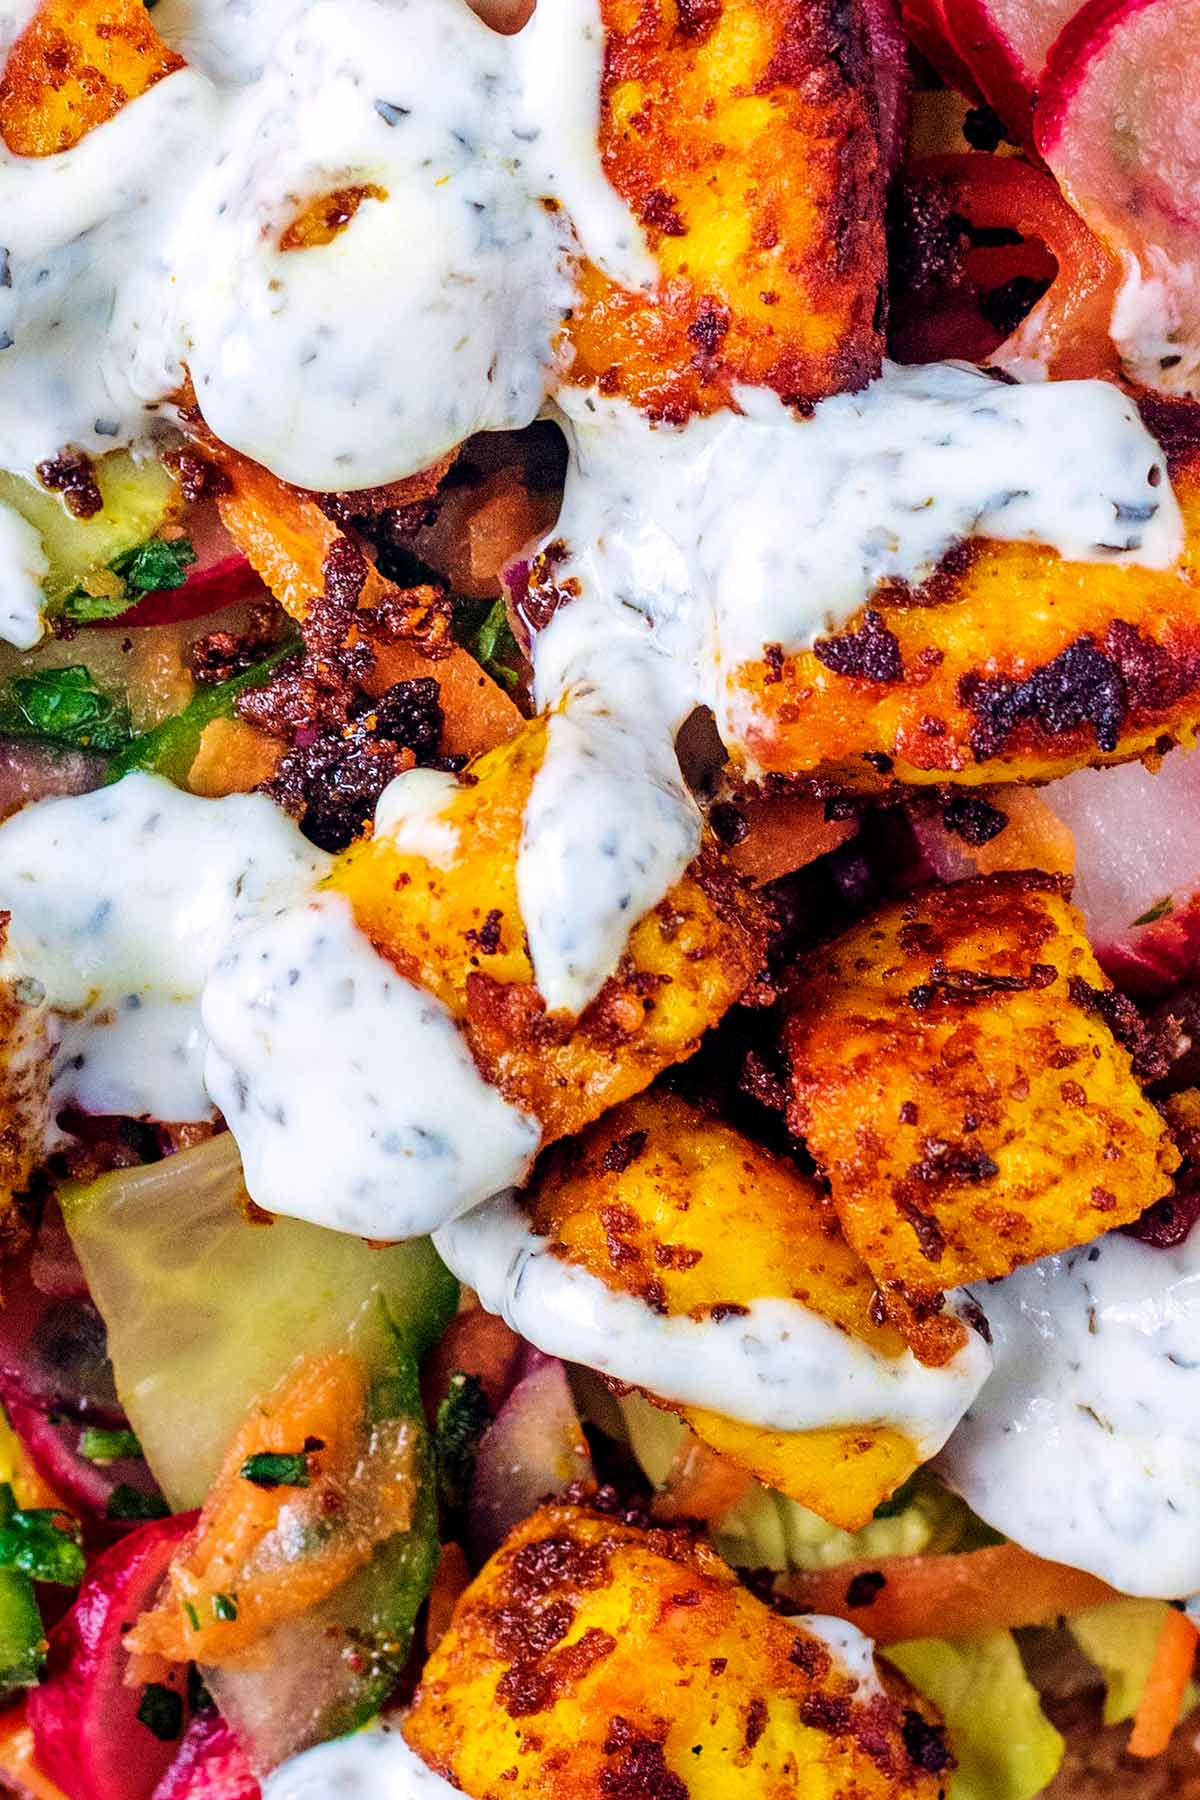 Cooked, spiced paneer drizzled with mint yogurt.